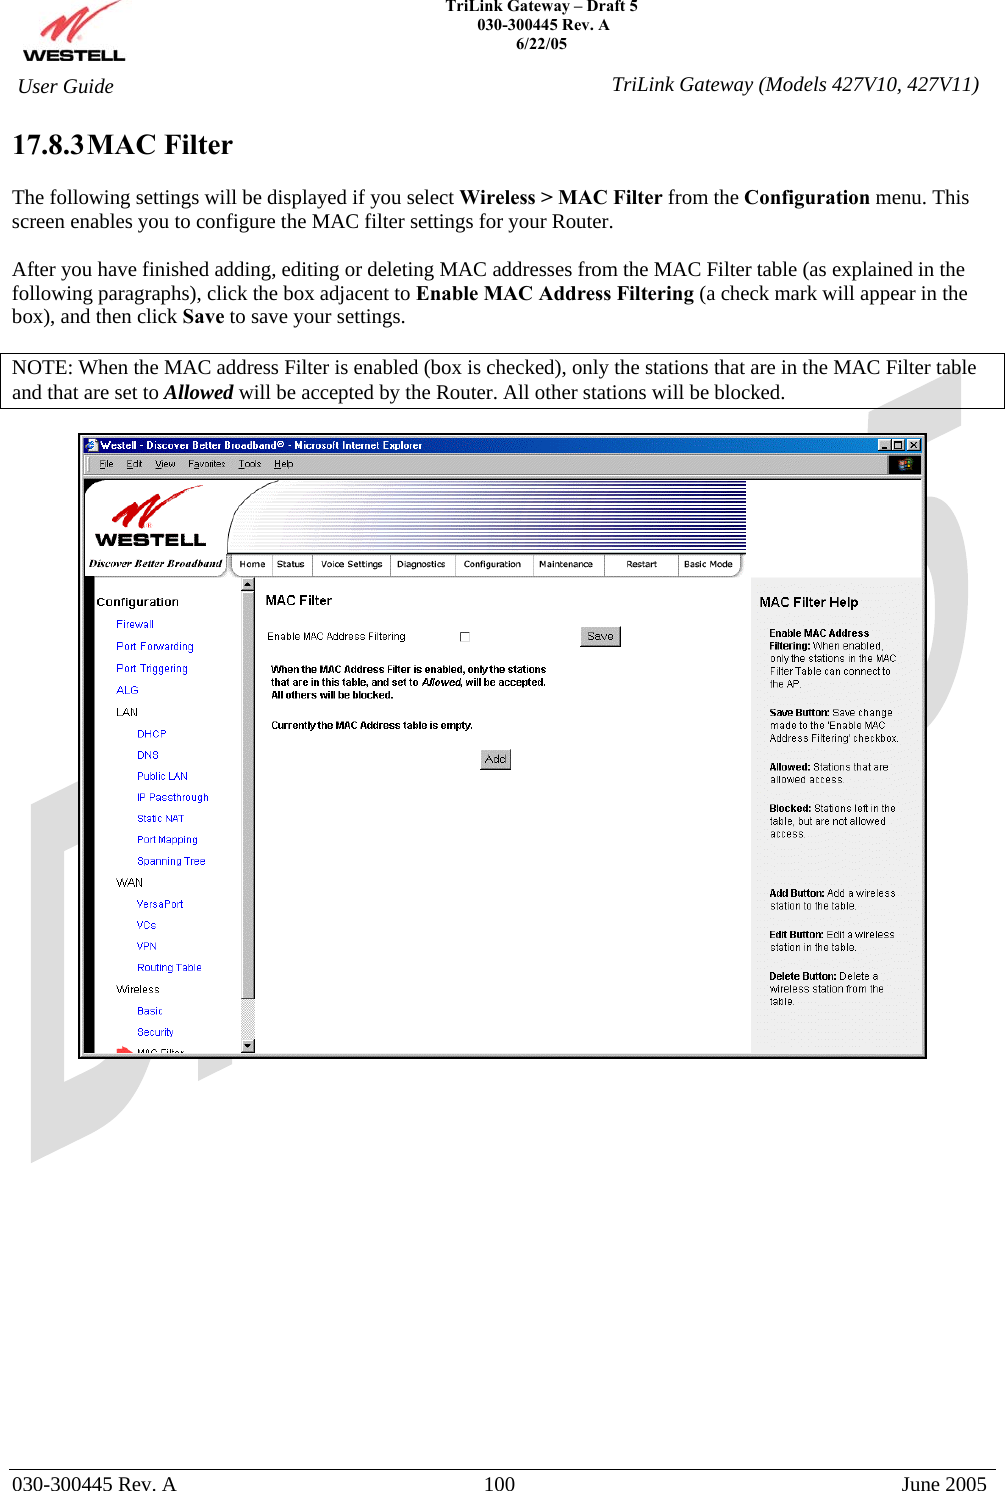    TriLink Gateway – Draft 5   030-300445 Rev. A 6/22/05   030-300445 Rev. A  100  June 2005  User Guide  TriLink Gateway (Models 427V10, 427V11)17.8.3 MAC  Filter  The following settings will be displayed if you select Wireless &gt; MAC Filter from the Configuration menu. This screen enables you to configure the MAC filter settings for your Router.  After you have finished adding, editing or deleting MAC addresses from the MAC Filter table (as explained in the following paragraphs), click the box adjacent to Enable MAC Address Filtering (a check mark will appear in the box), and then click Save to save your settings.  NOTE: When the MAC address Filter is enabled (box is checked), only the stations that are in the MAC Filter table and that are set to Allowed will be accepted by the Router. All other stations will be blocked.                    